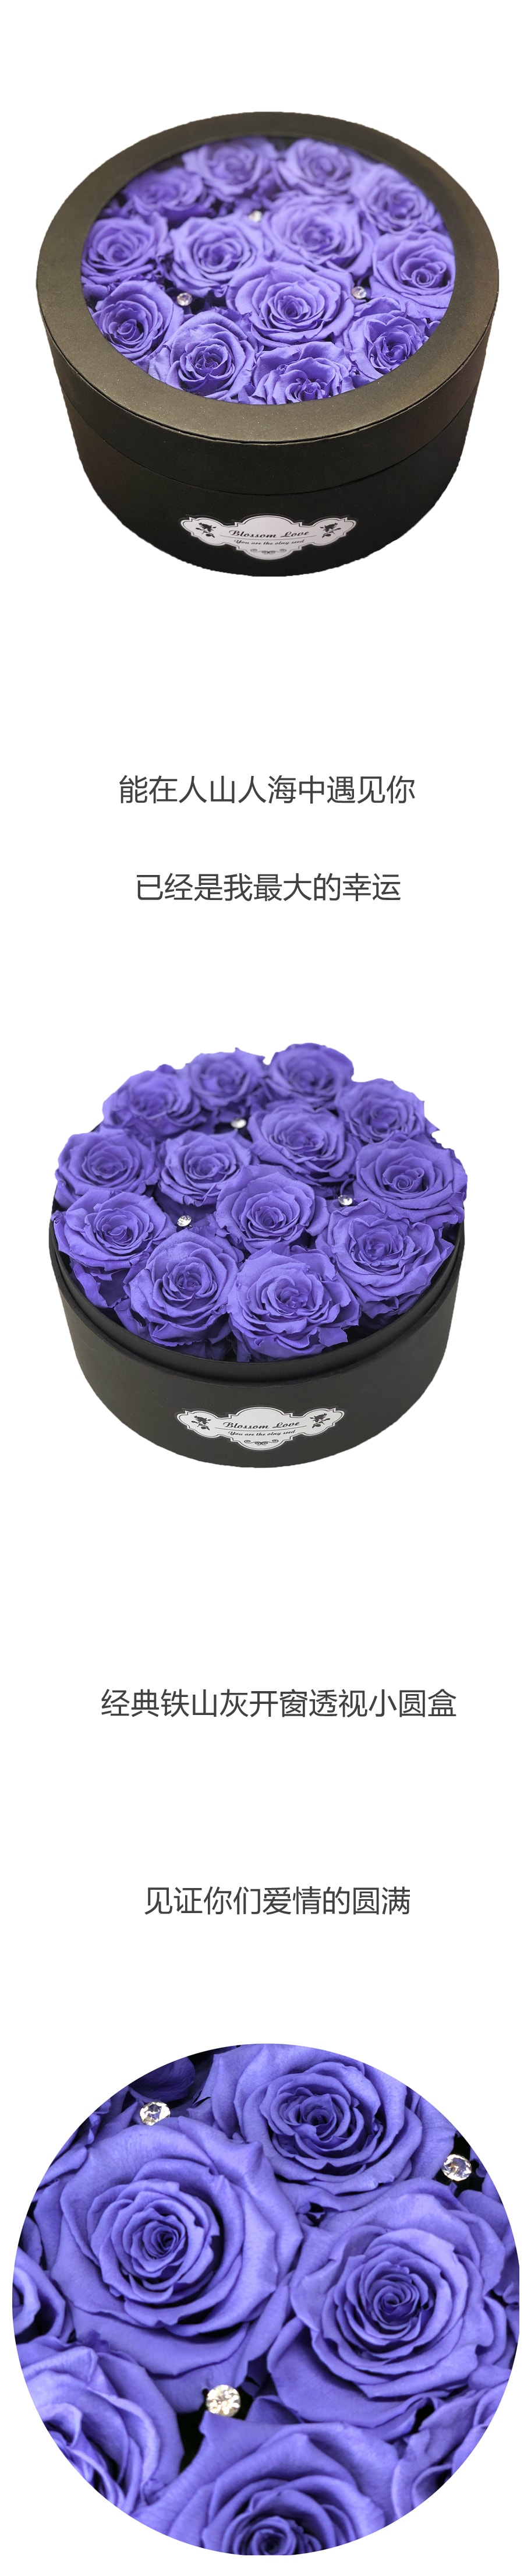 See-through small round box- Purple roses